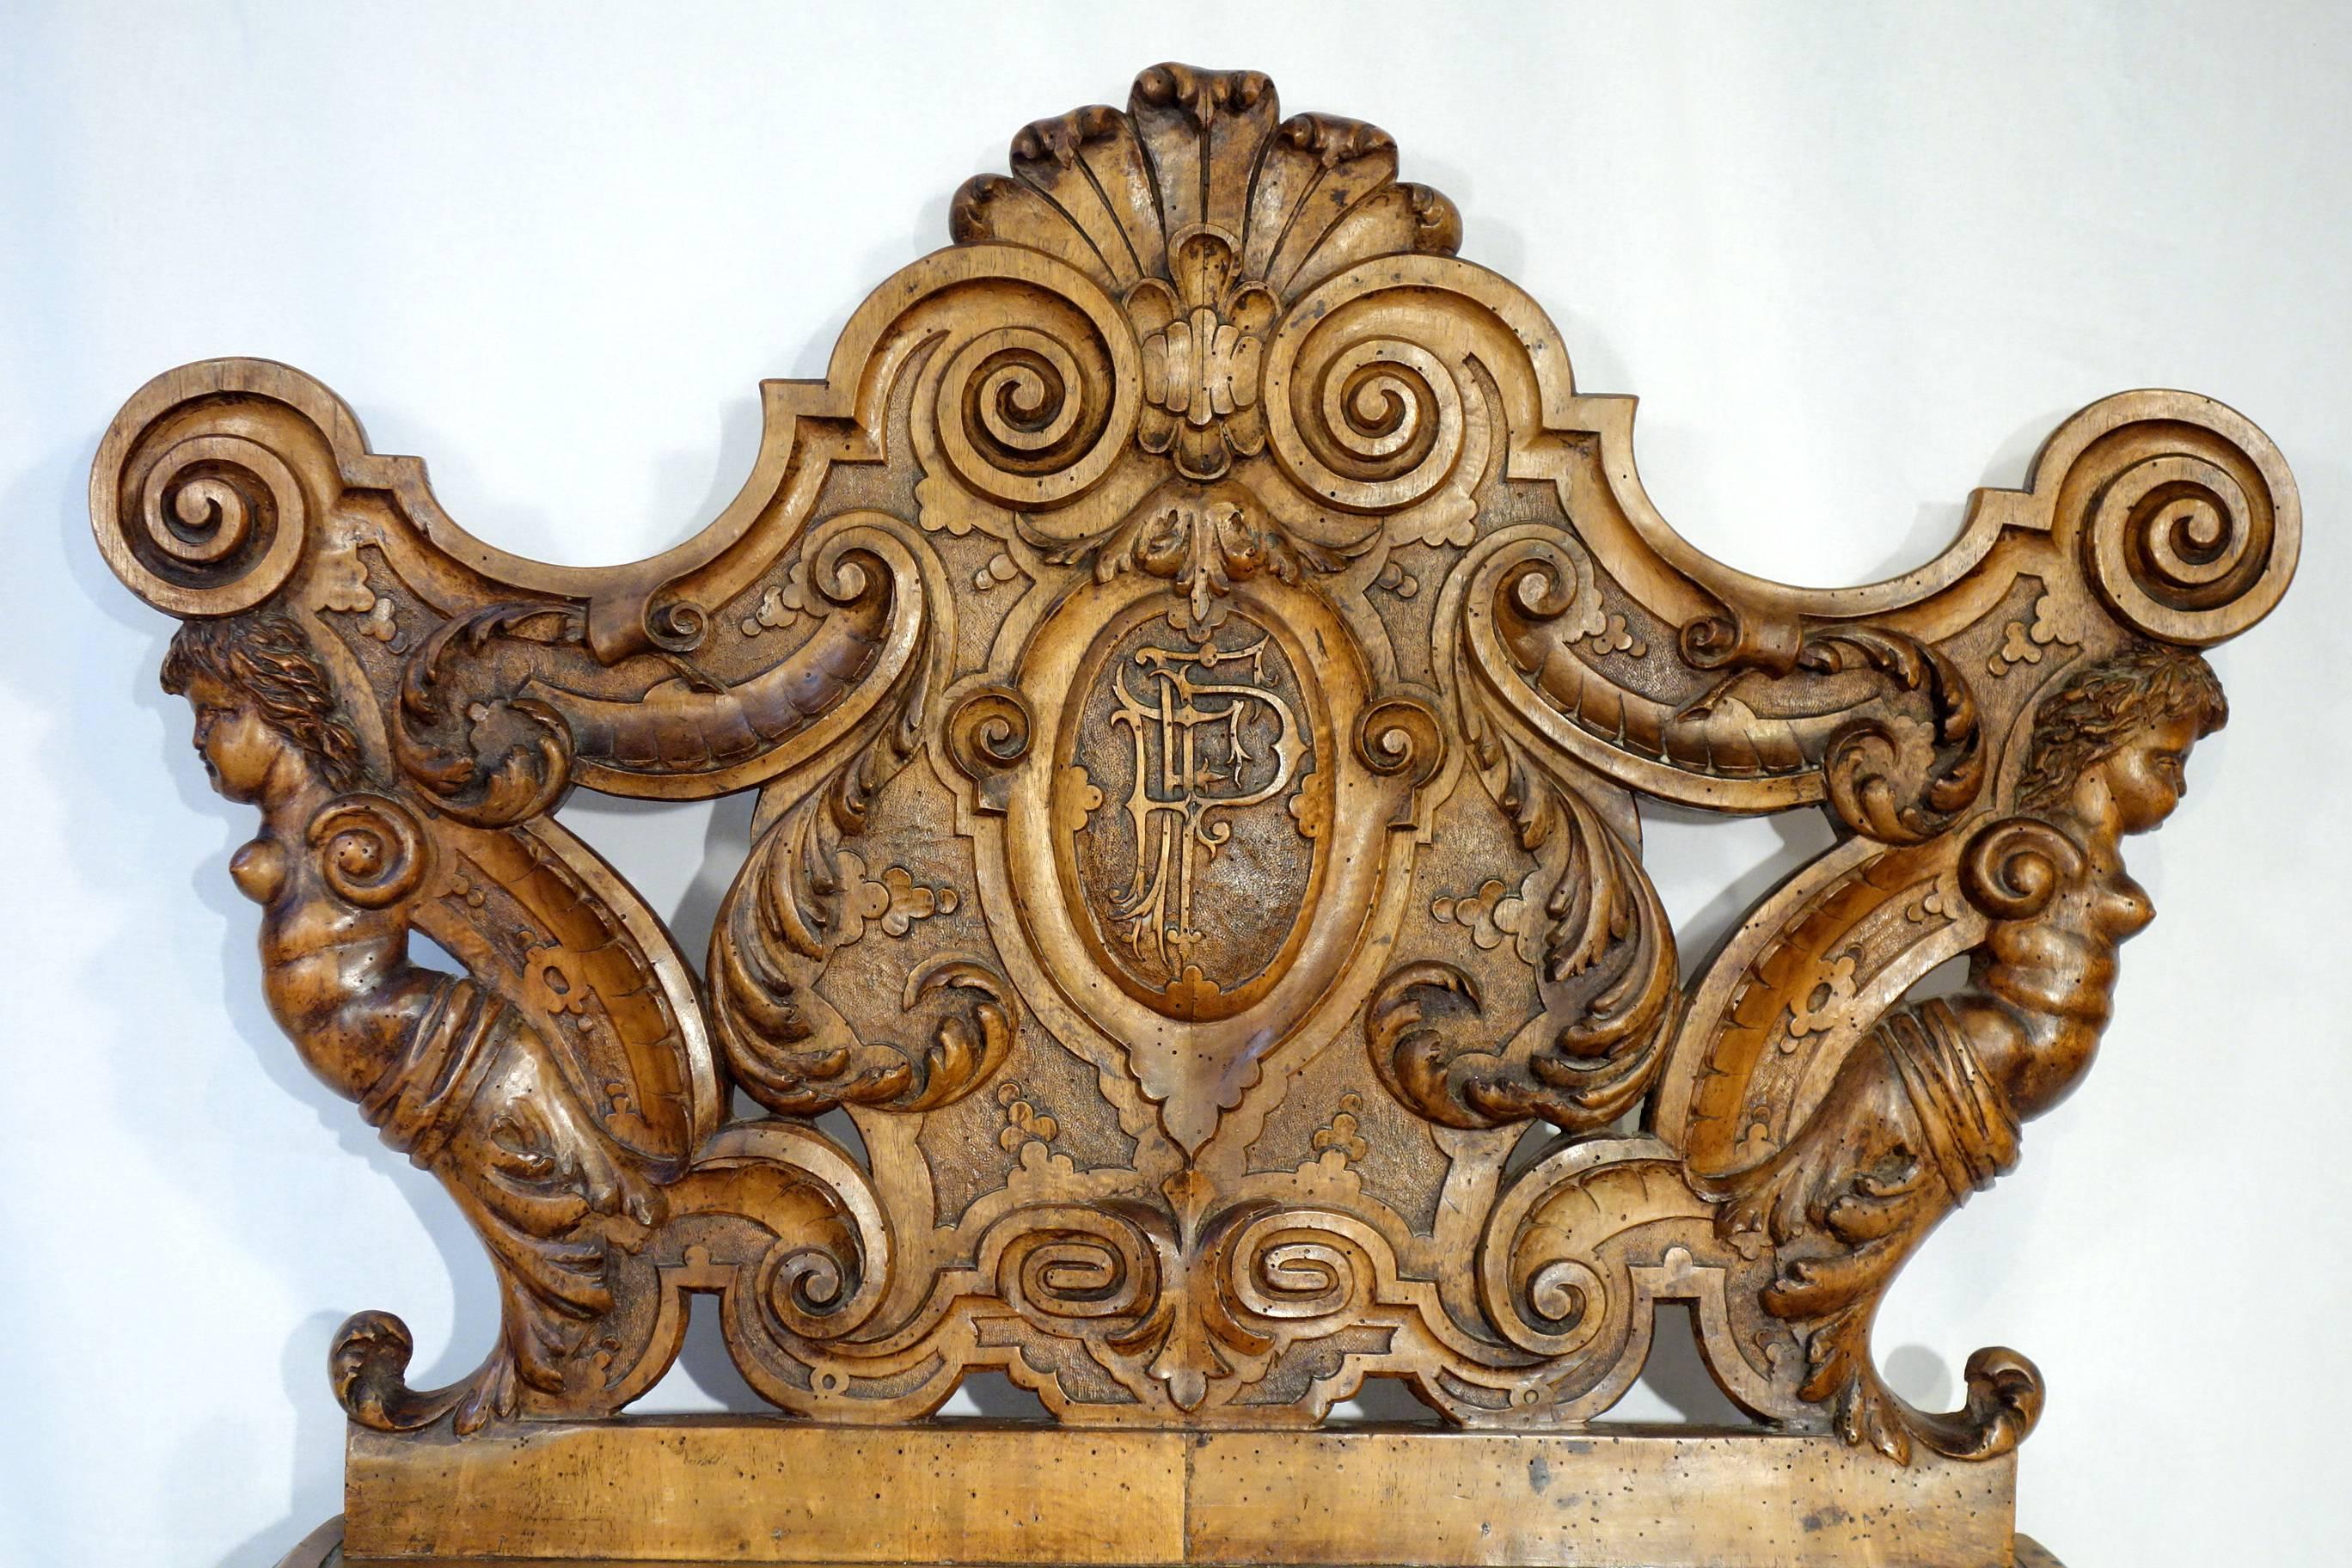 Magnificent walnut hand-carved bench attributed to master artist Valentino Besarel (b. July 29 1829, d. Dec 11 1902) of Venice, Italy.  
Renaissance Revival.  
High quality; soft, fine, deep hand carving.  Monogrammed 